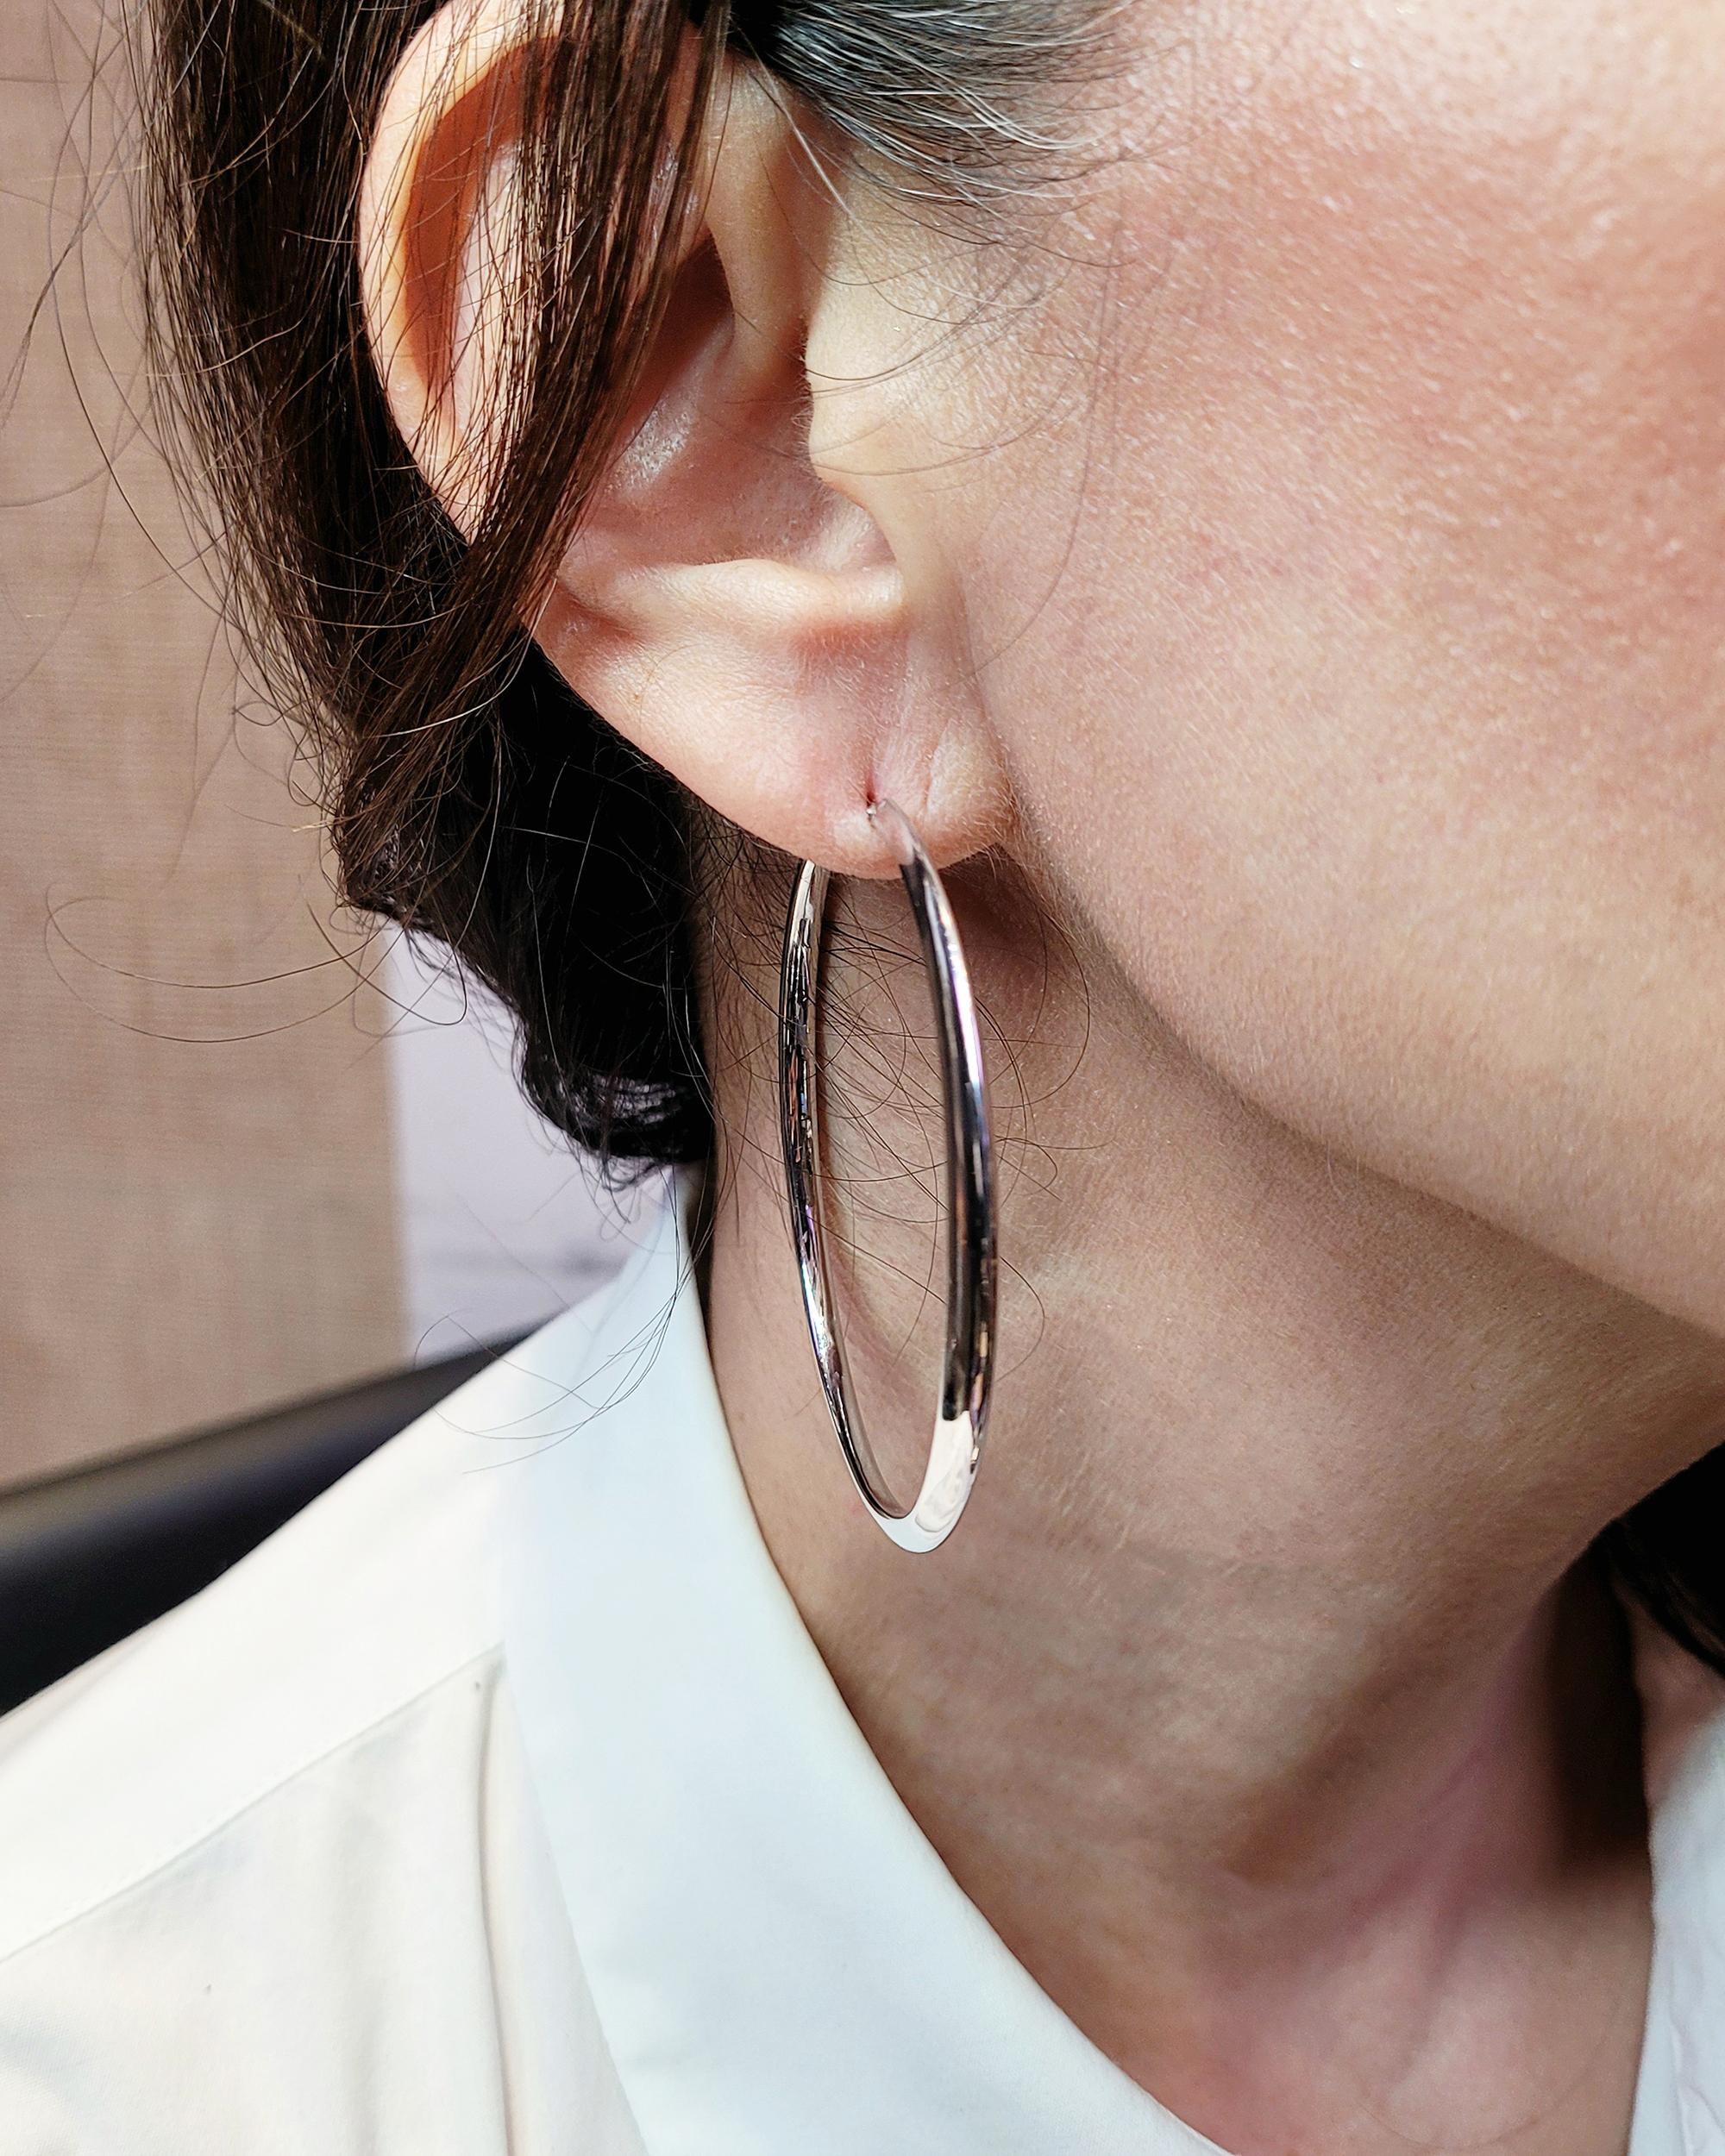 These lovely classic hoop earrings are made from 18k white gold, a high-quality and durable metal prized for its bright, lustrous finish. With a weight of 8.49 grams, they have a substantial feel and are designed to last many years.

The earrings